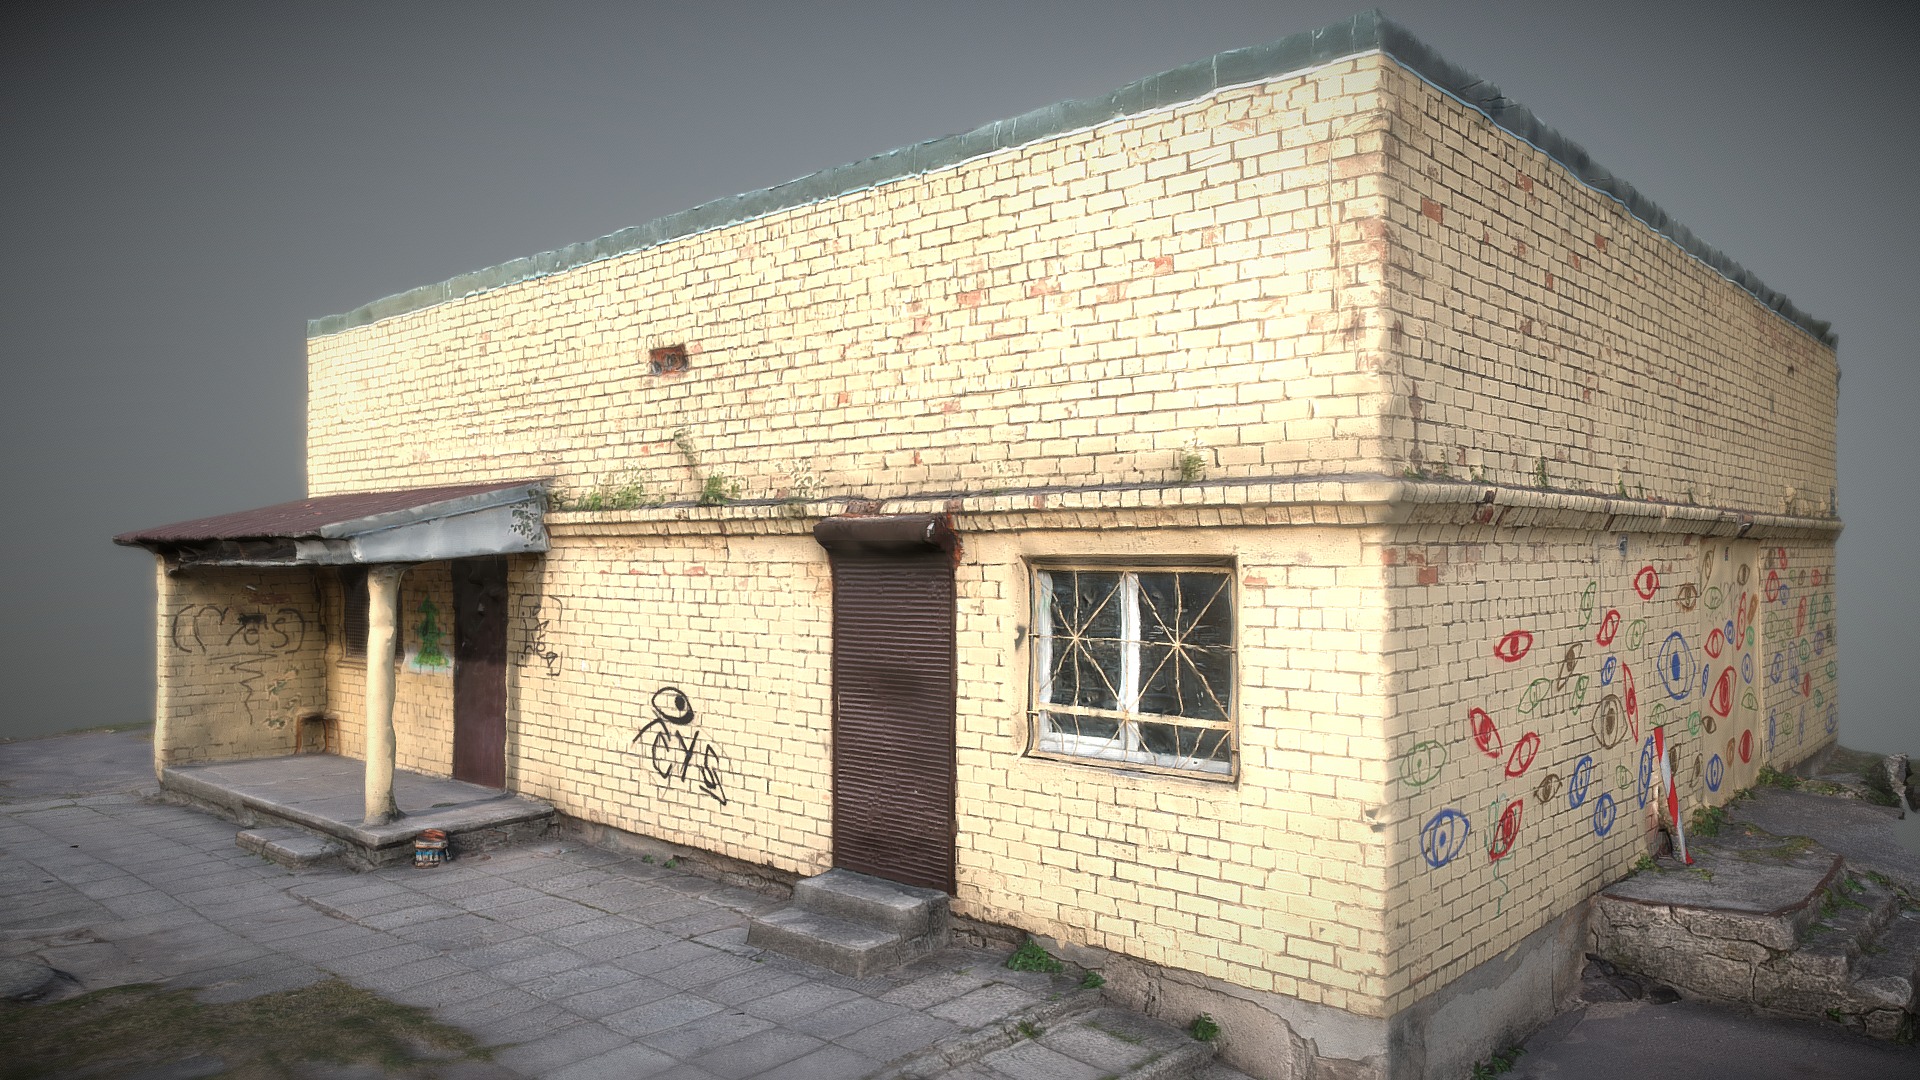 3D model Brick Building - This is a 3D model of the Brick Building. The 3D model is about a brick building with graffiti on it.